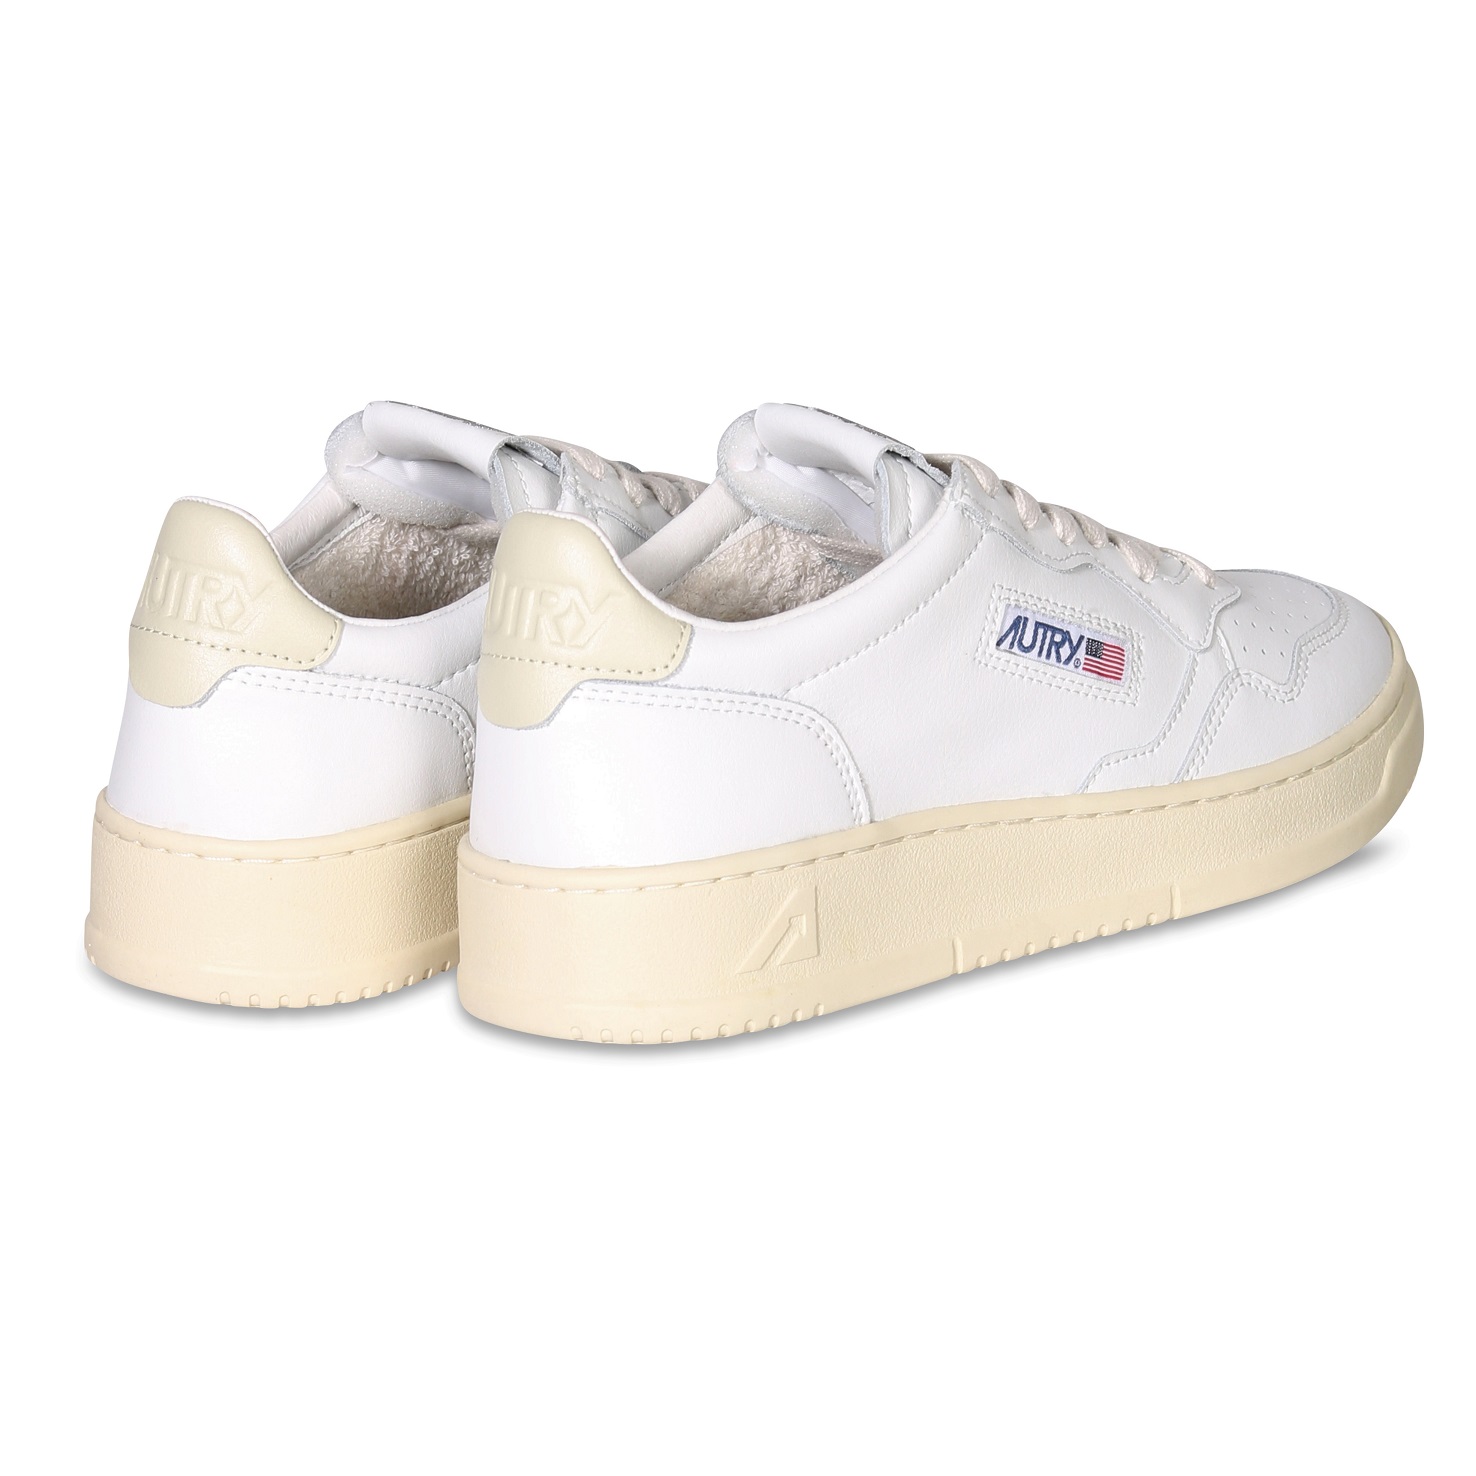 AUTRY ACTION SHOES Sneaker Low in White/Beige 38